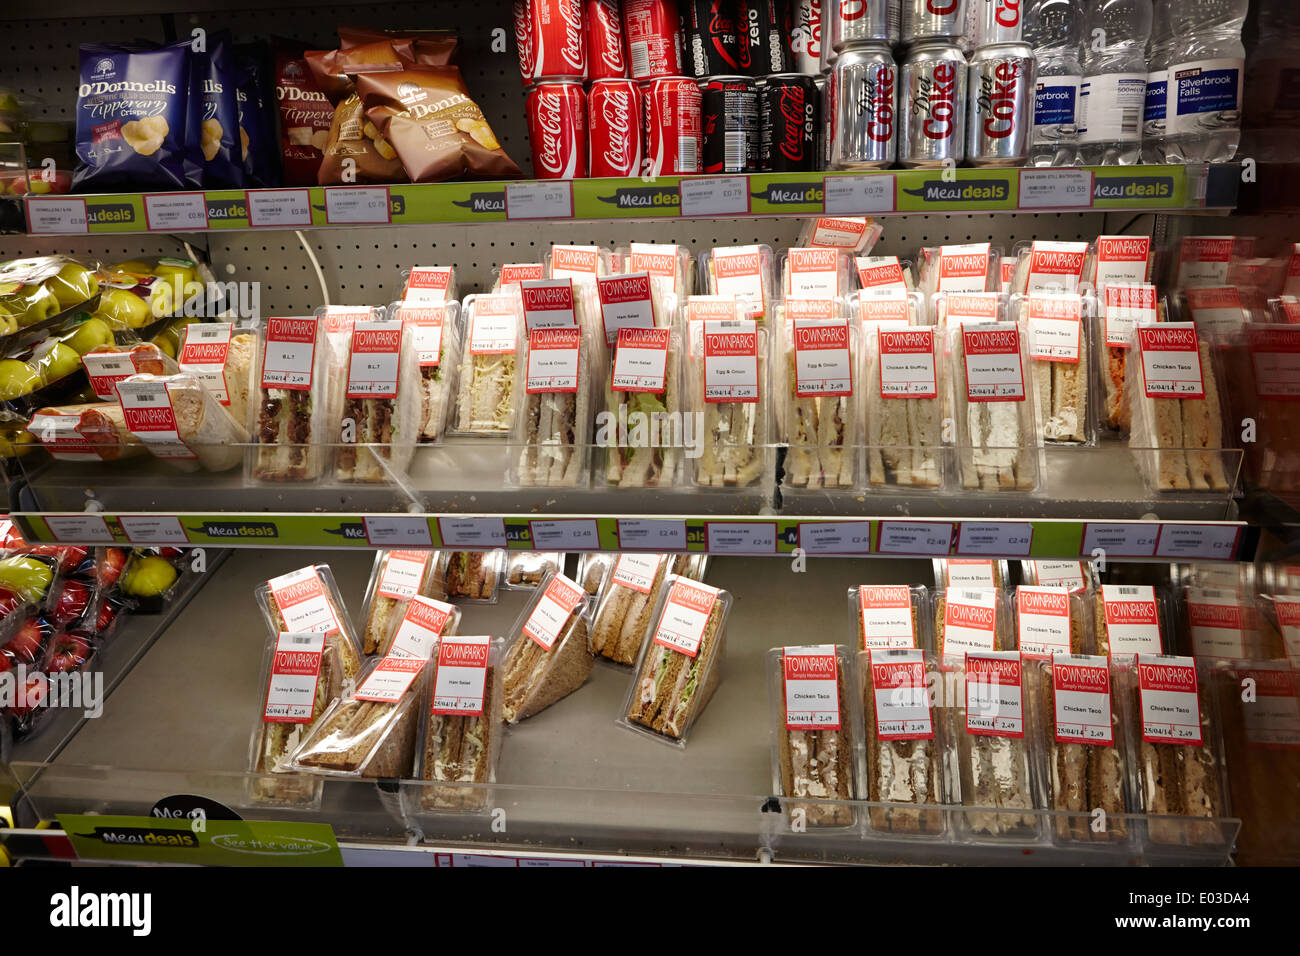 pre packed sandwiches and snacks on sale in a filling station convenience store in northern ireland Stock Photo